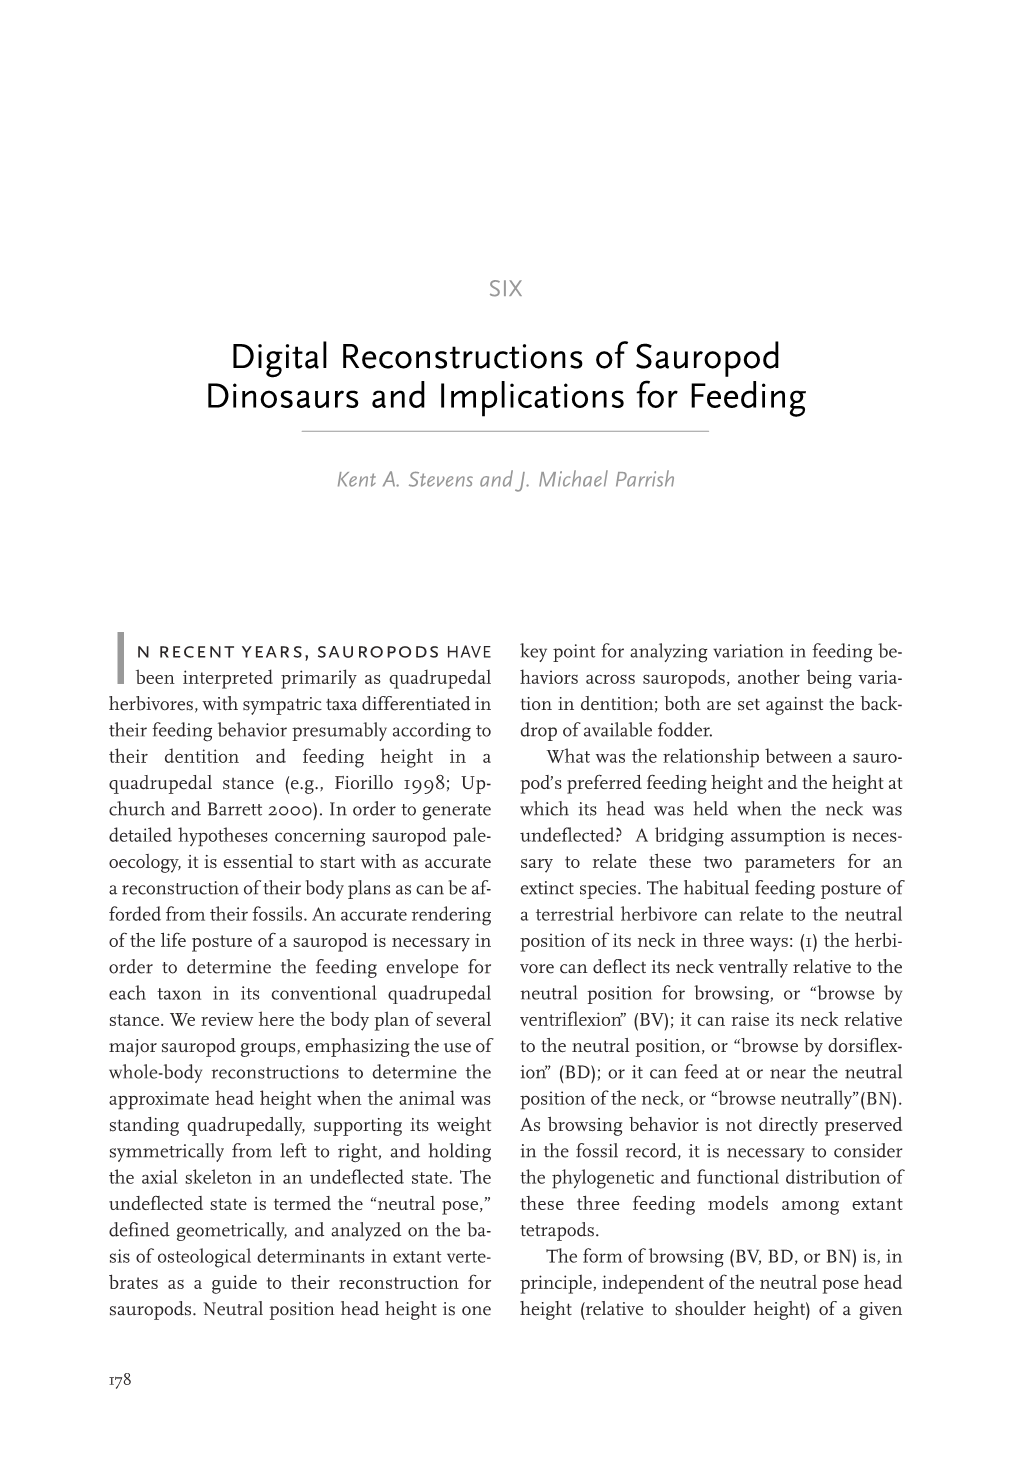 Digital Reconstructions of Sauropod Dinosaurs and Implications for Feeding